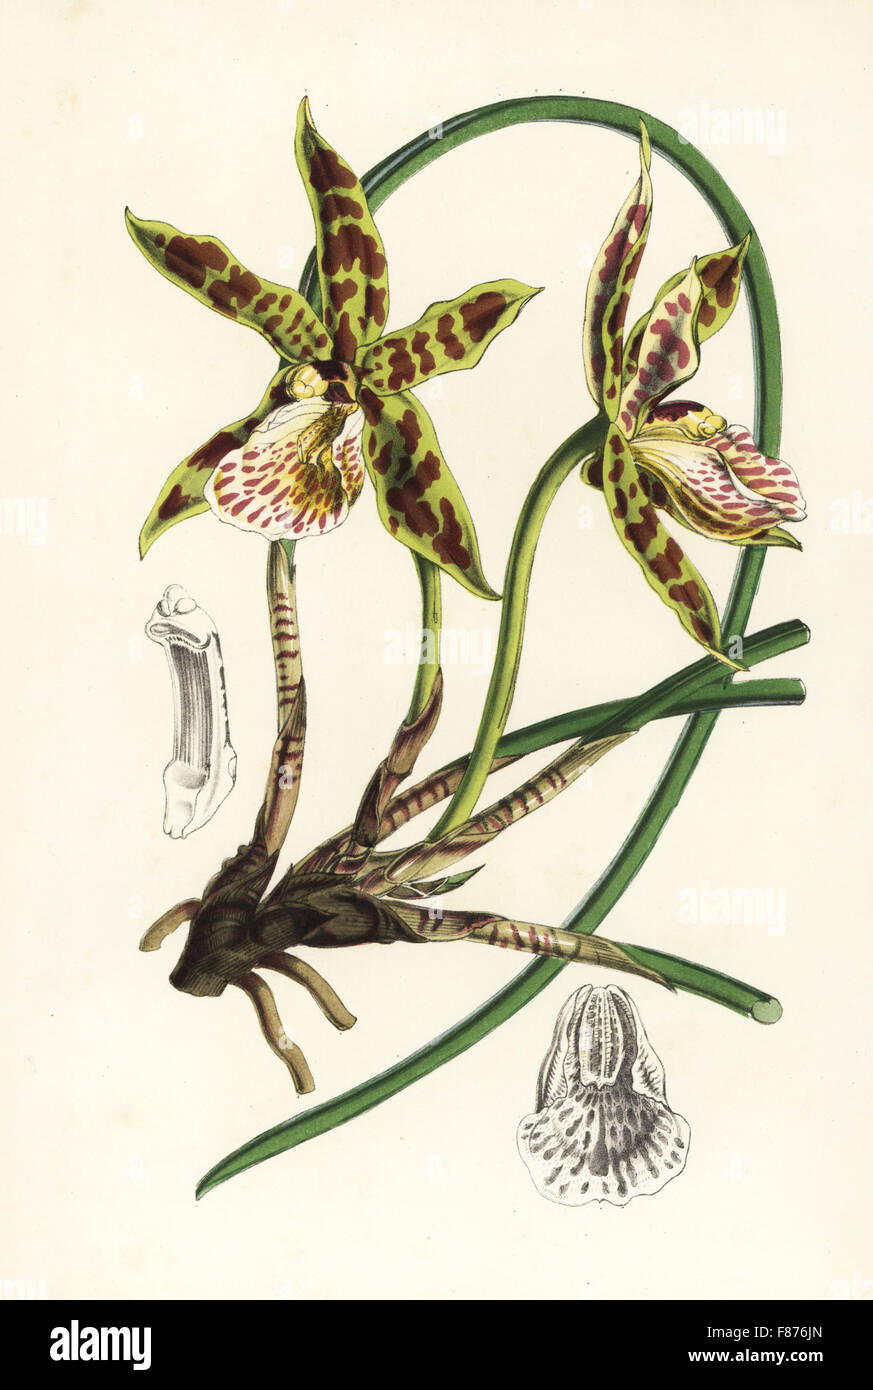 Hadwen's scuticaria orchid, Scuticaria hadwenii (Bifrenaria hadwenii). Handcoloured lithograph from Louis van Houtte and Charles Lemaire's Flowers of the Gardens and Hothouses of Europe, Flore des Serres et des Jardins de l'Europe, Ghent, Belgium, 1851. Stock Photo